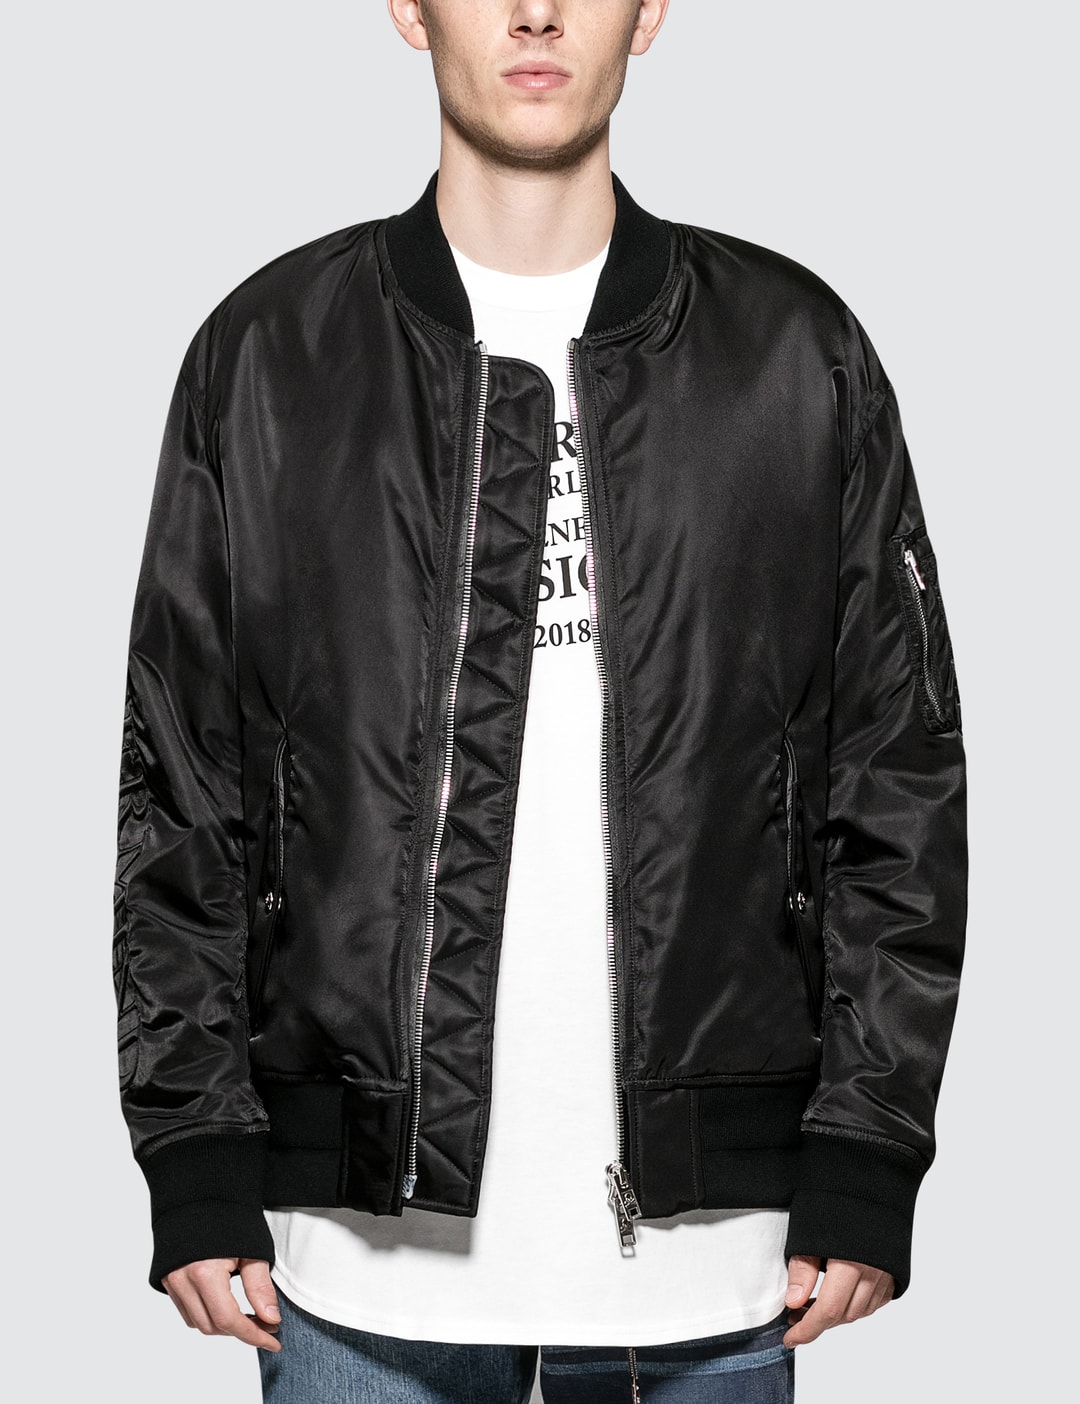 Mastermind World - Blouson | HBX - Globally Curated Fashion and ...